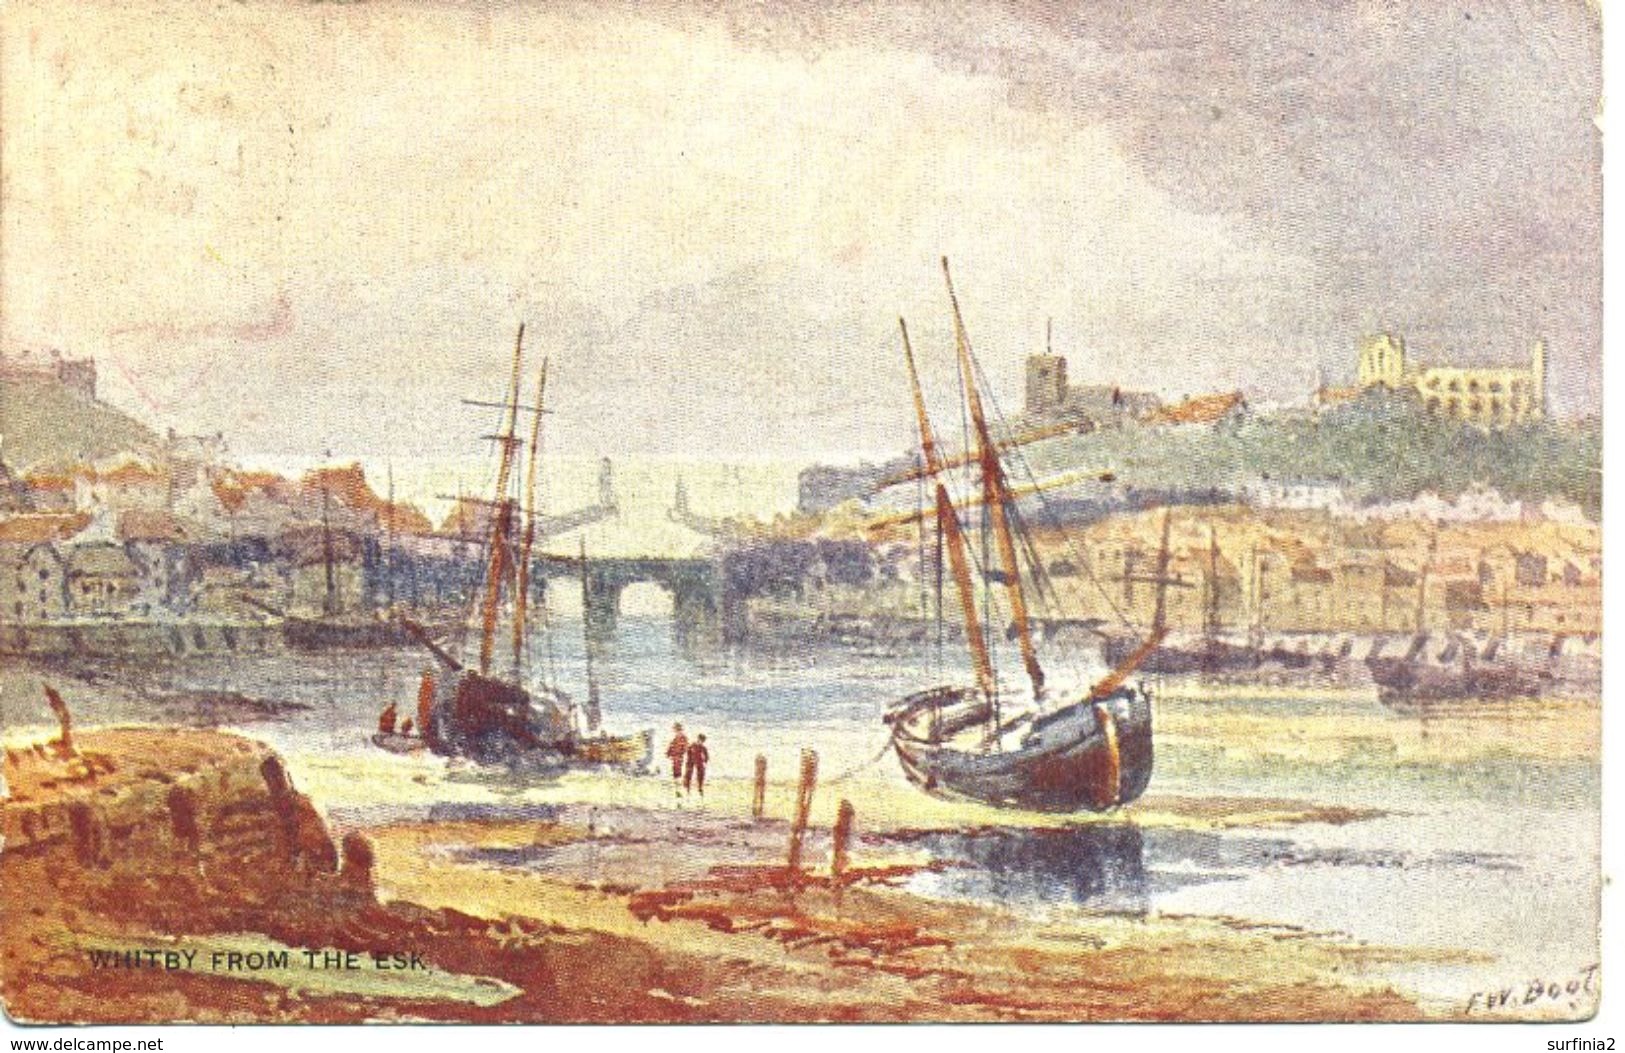 ARTIST - WHITBY FROM THE ESK By F W BOOT Art365 - Whitby